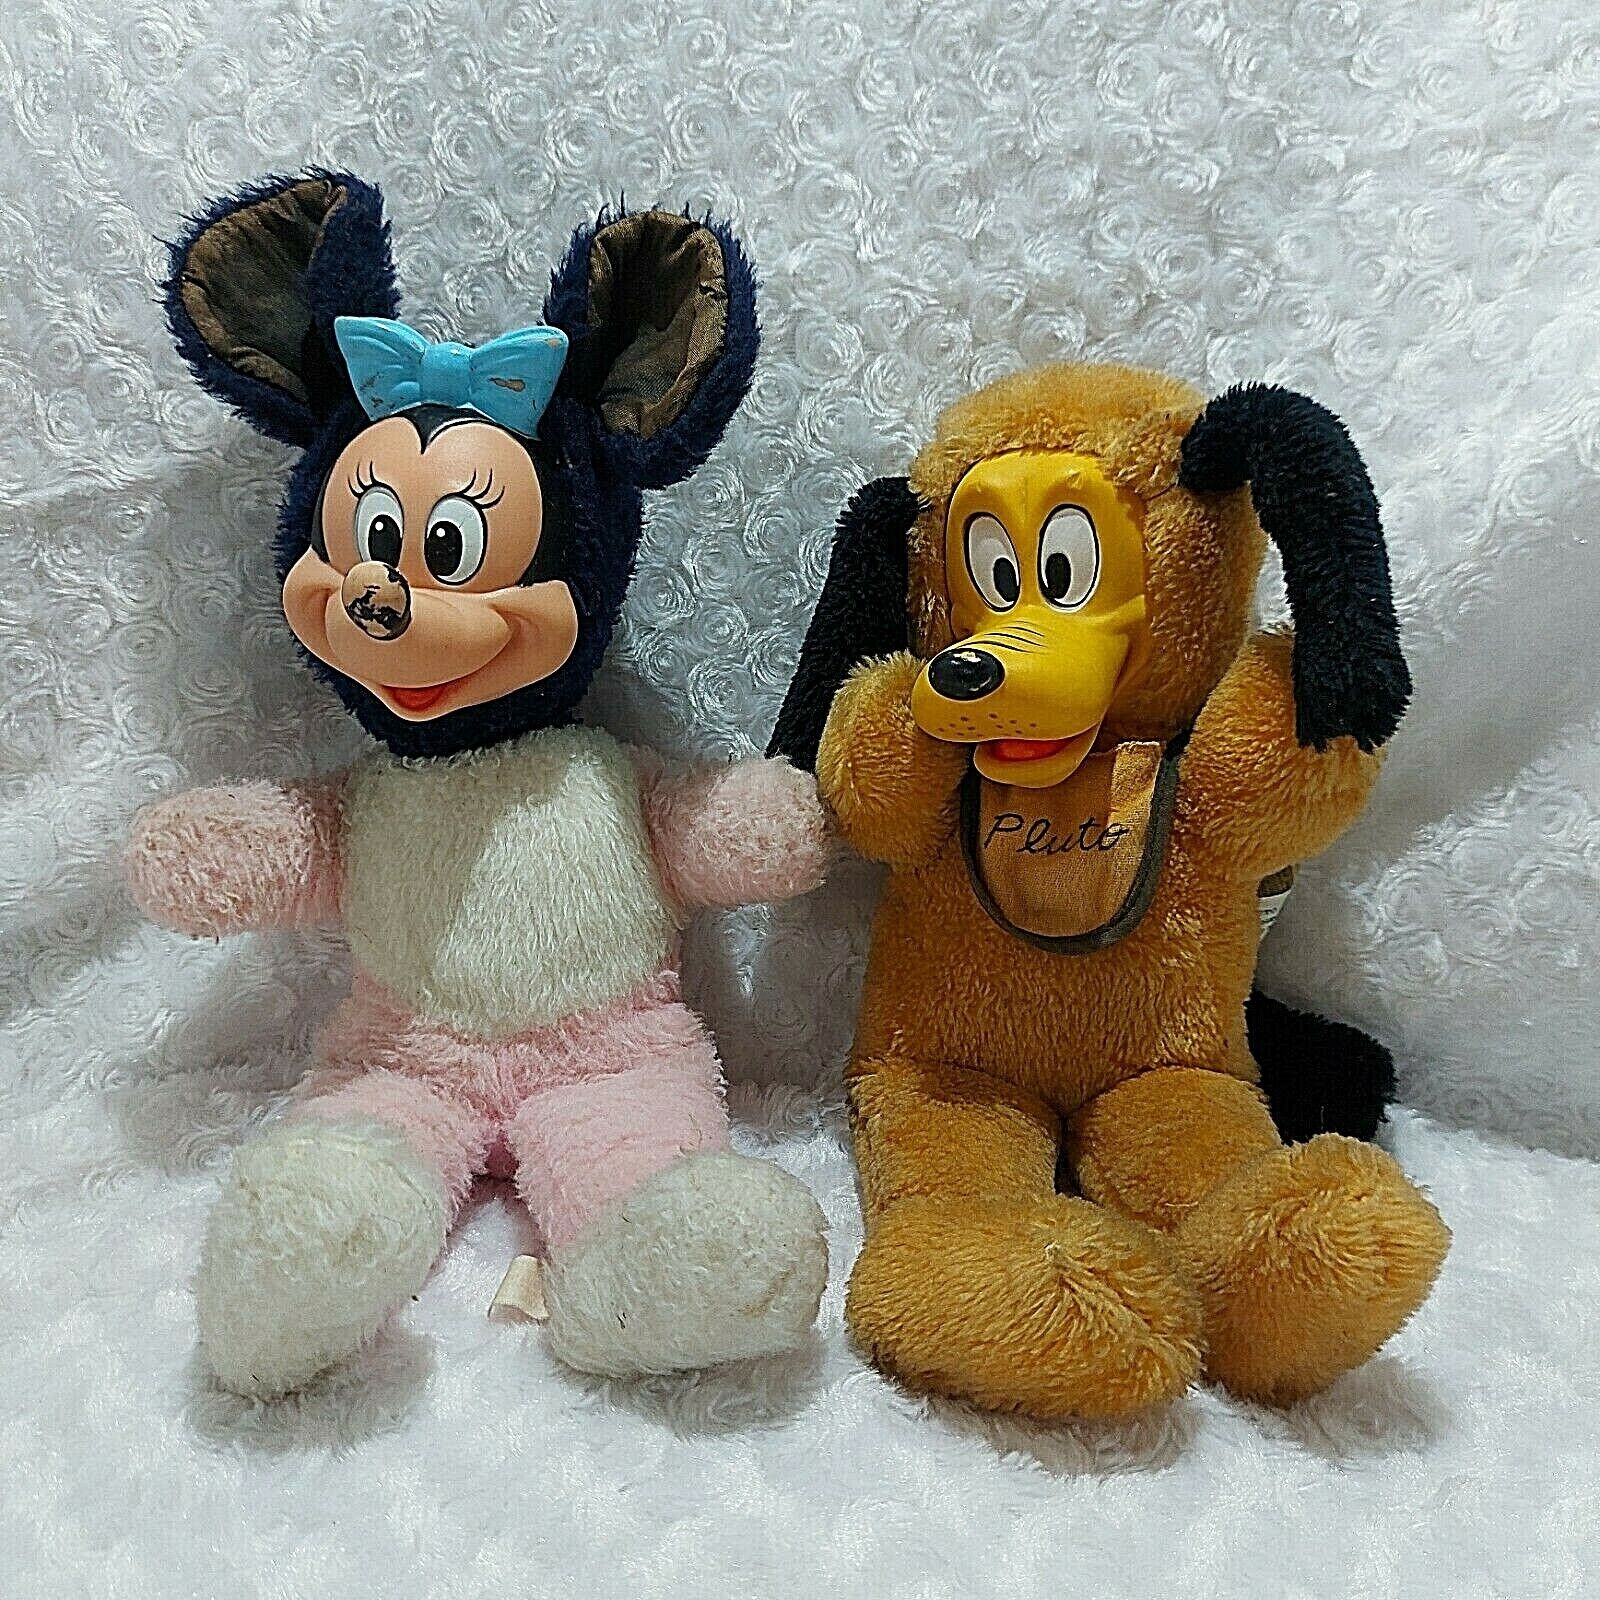 Rare Vintage Minnie Mouse and Pluto Rushton Doll Company Walt Disney Rubber Face